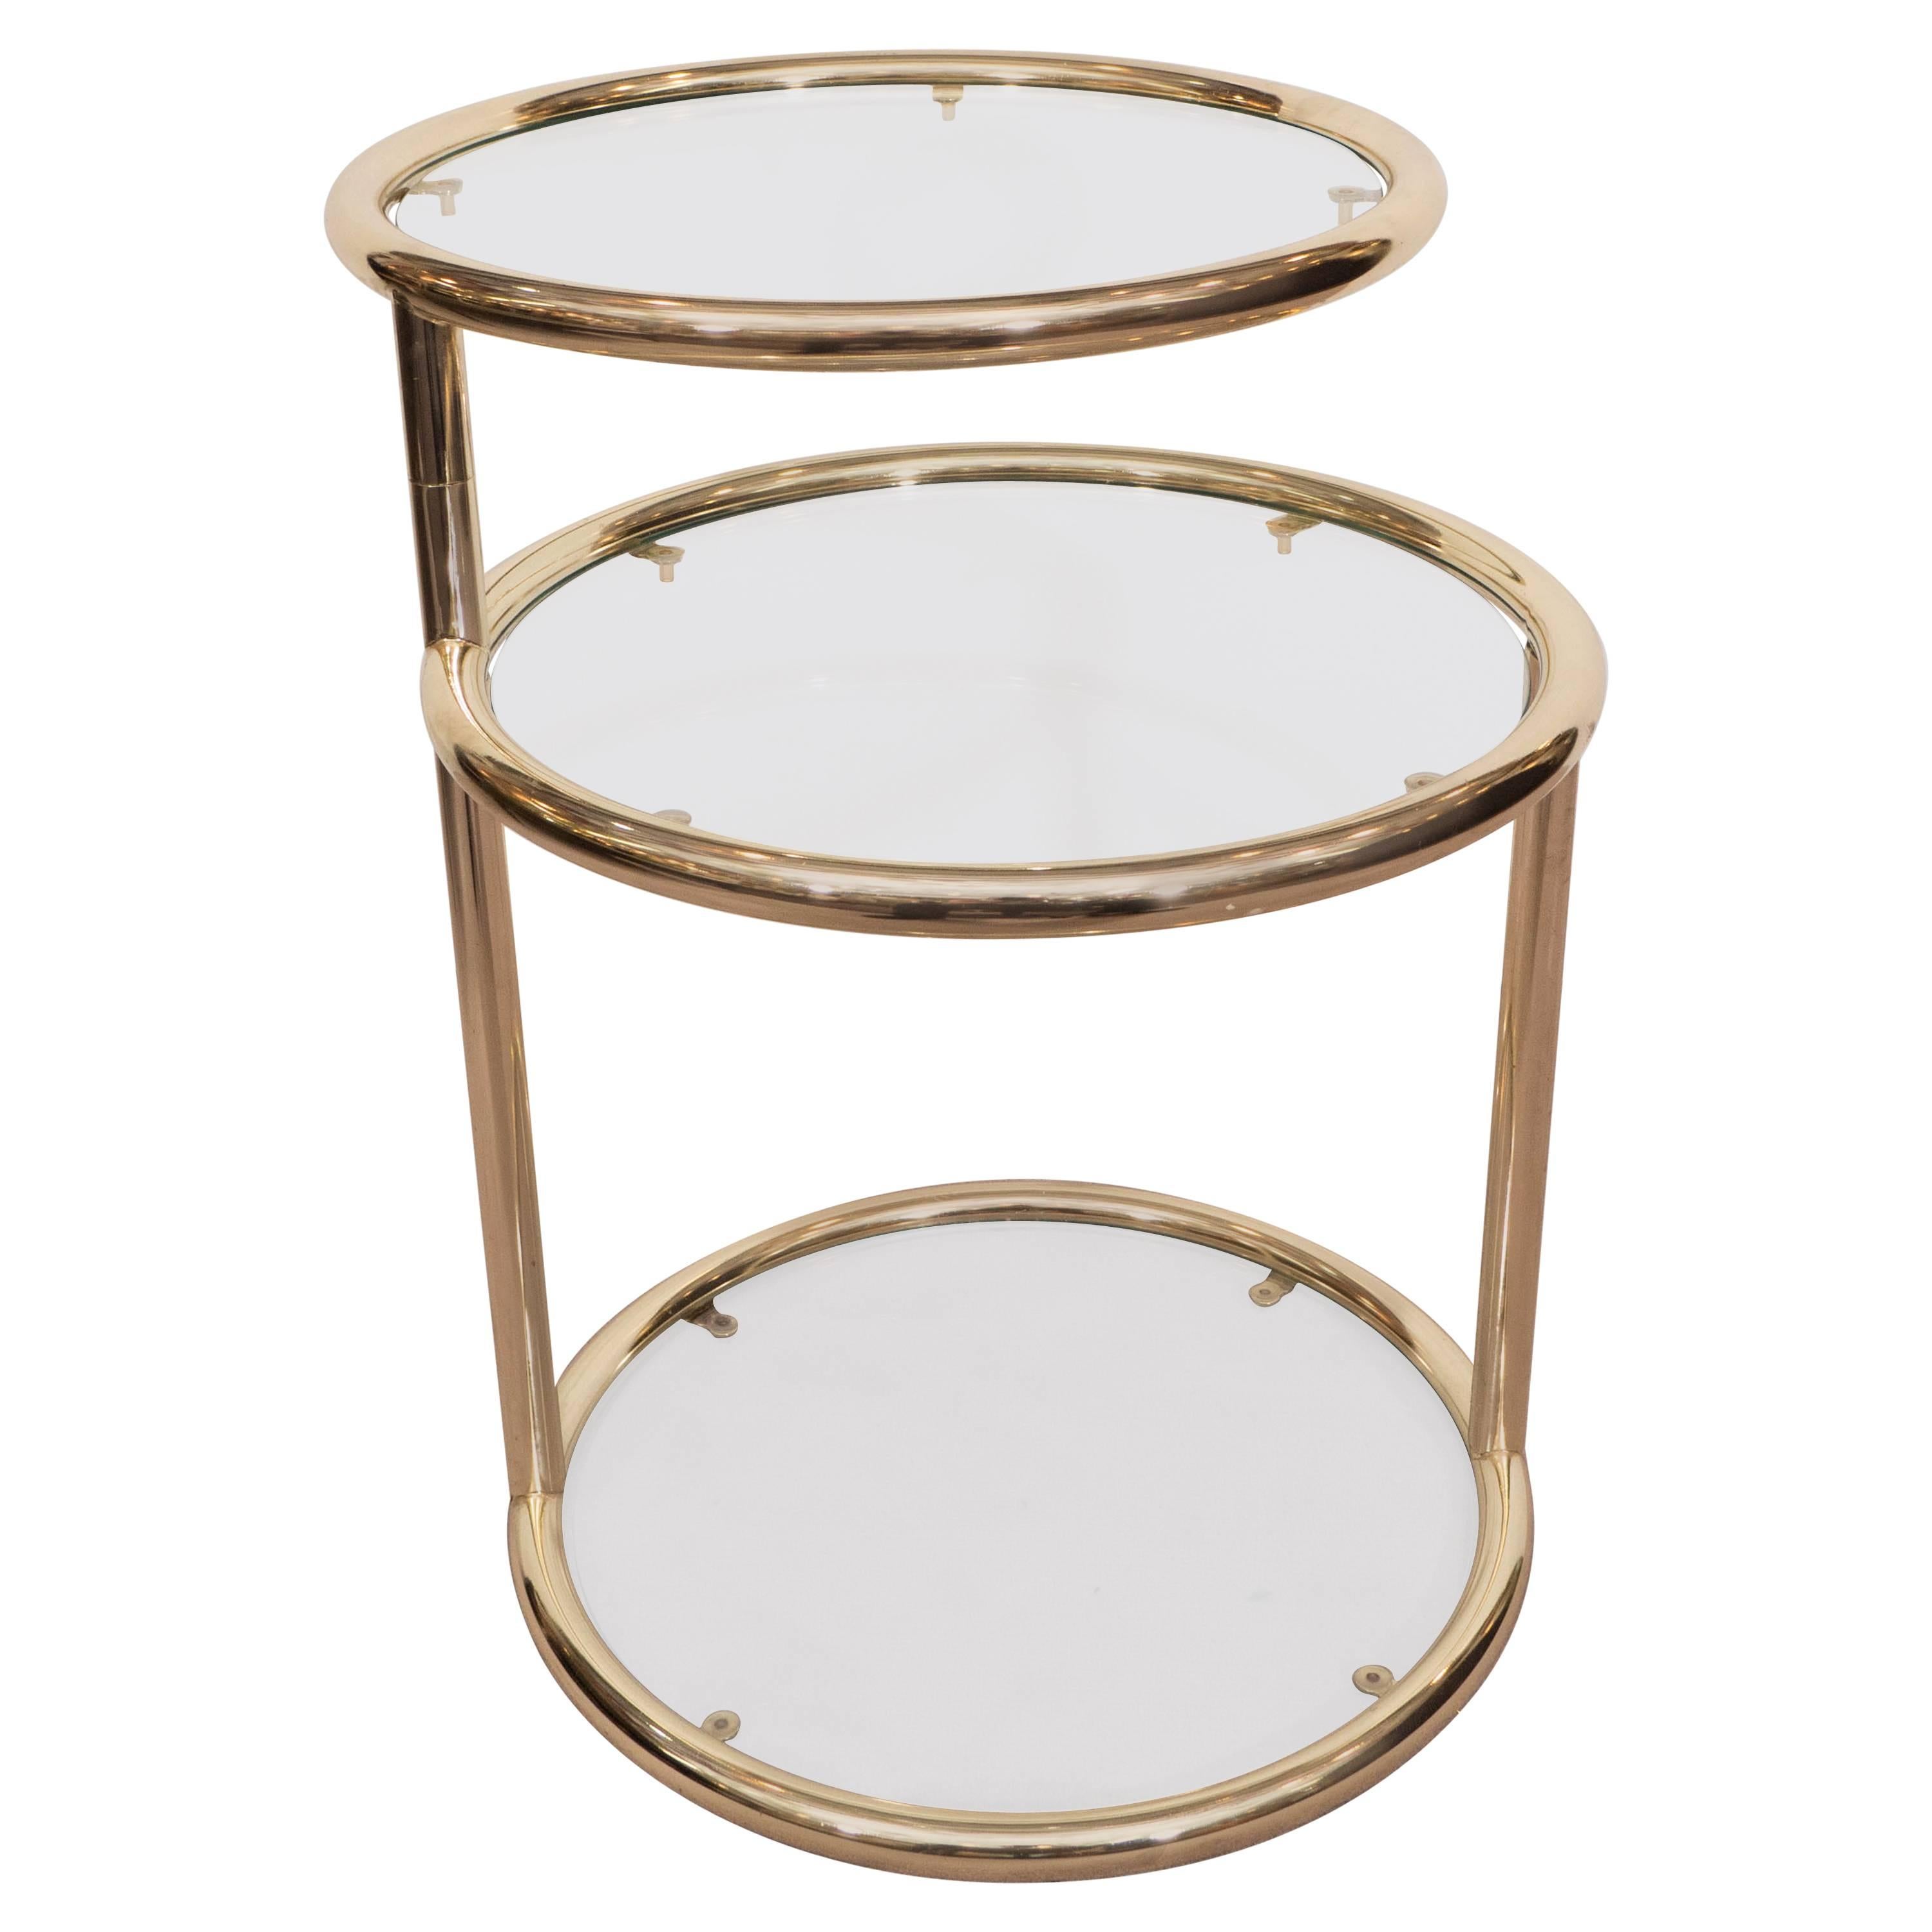 Round Three-Tier Brass Swivel Table in the Style of Milo Baughman